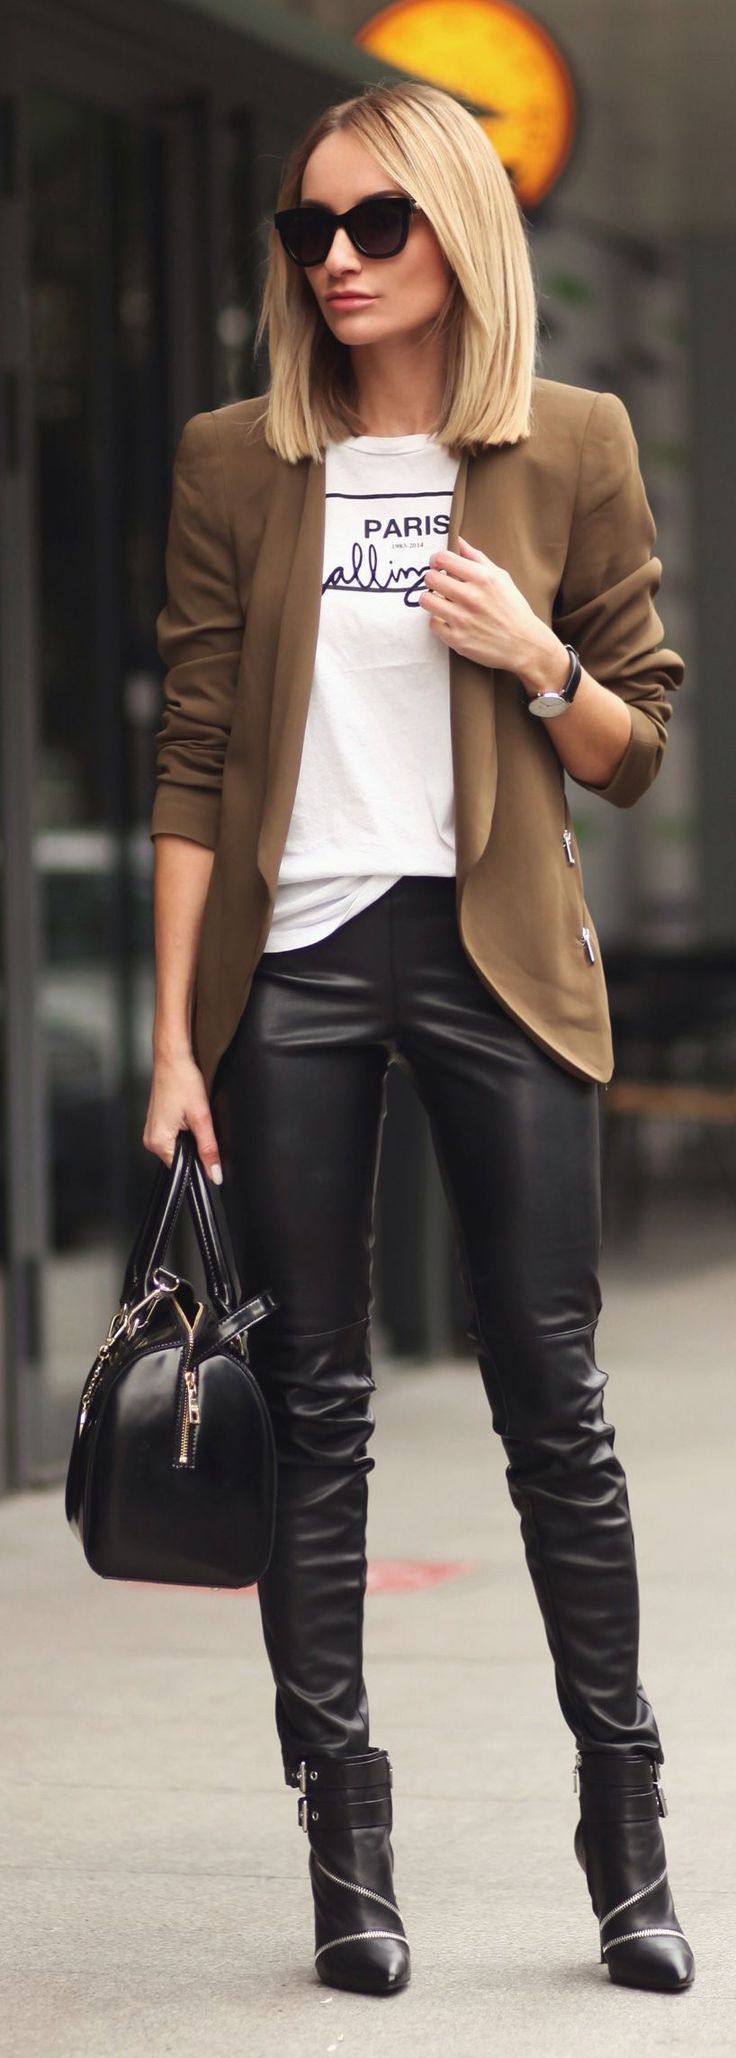 21 Outfit Ideas to Glam a Pretty Street Look - Pretty Designs